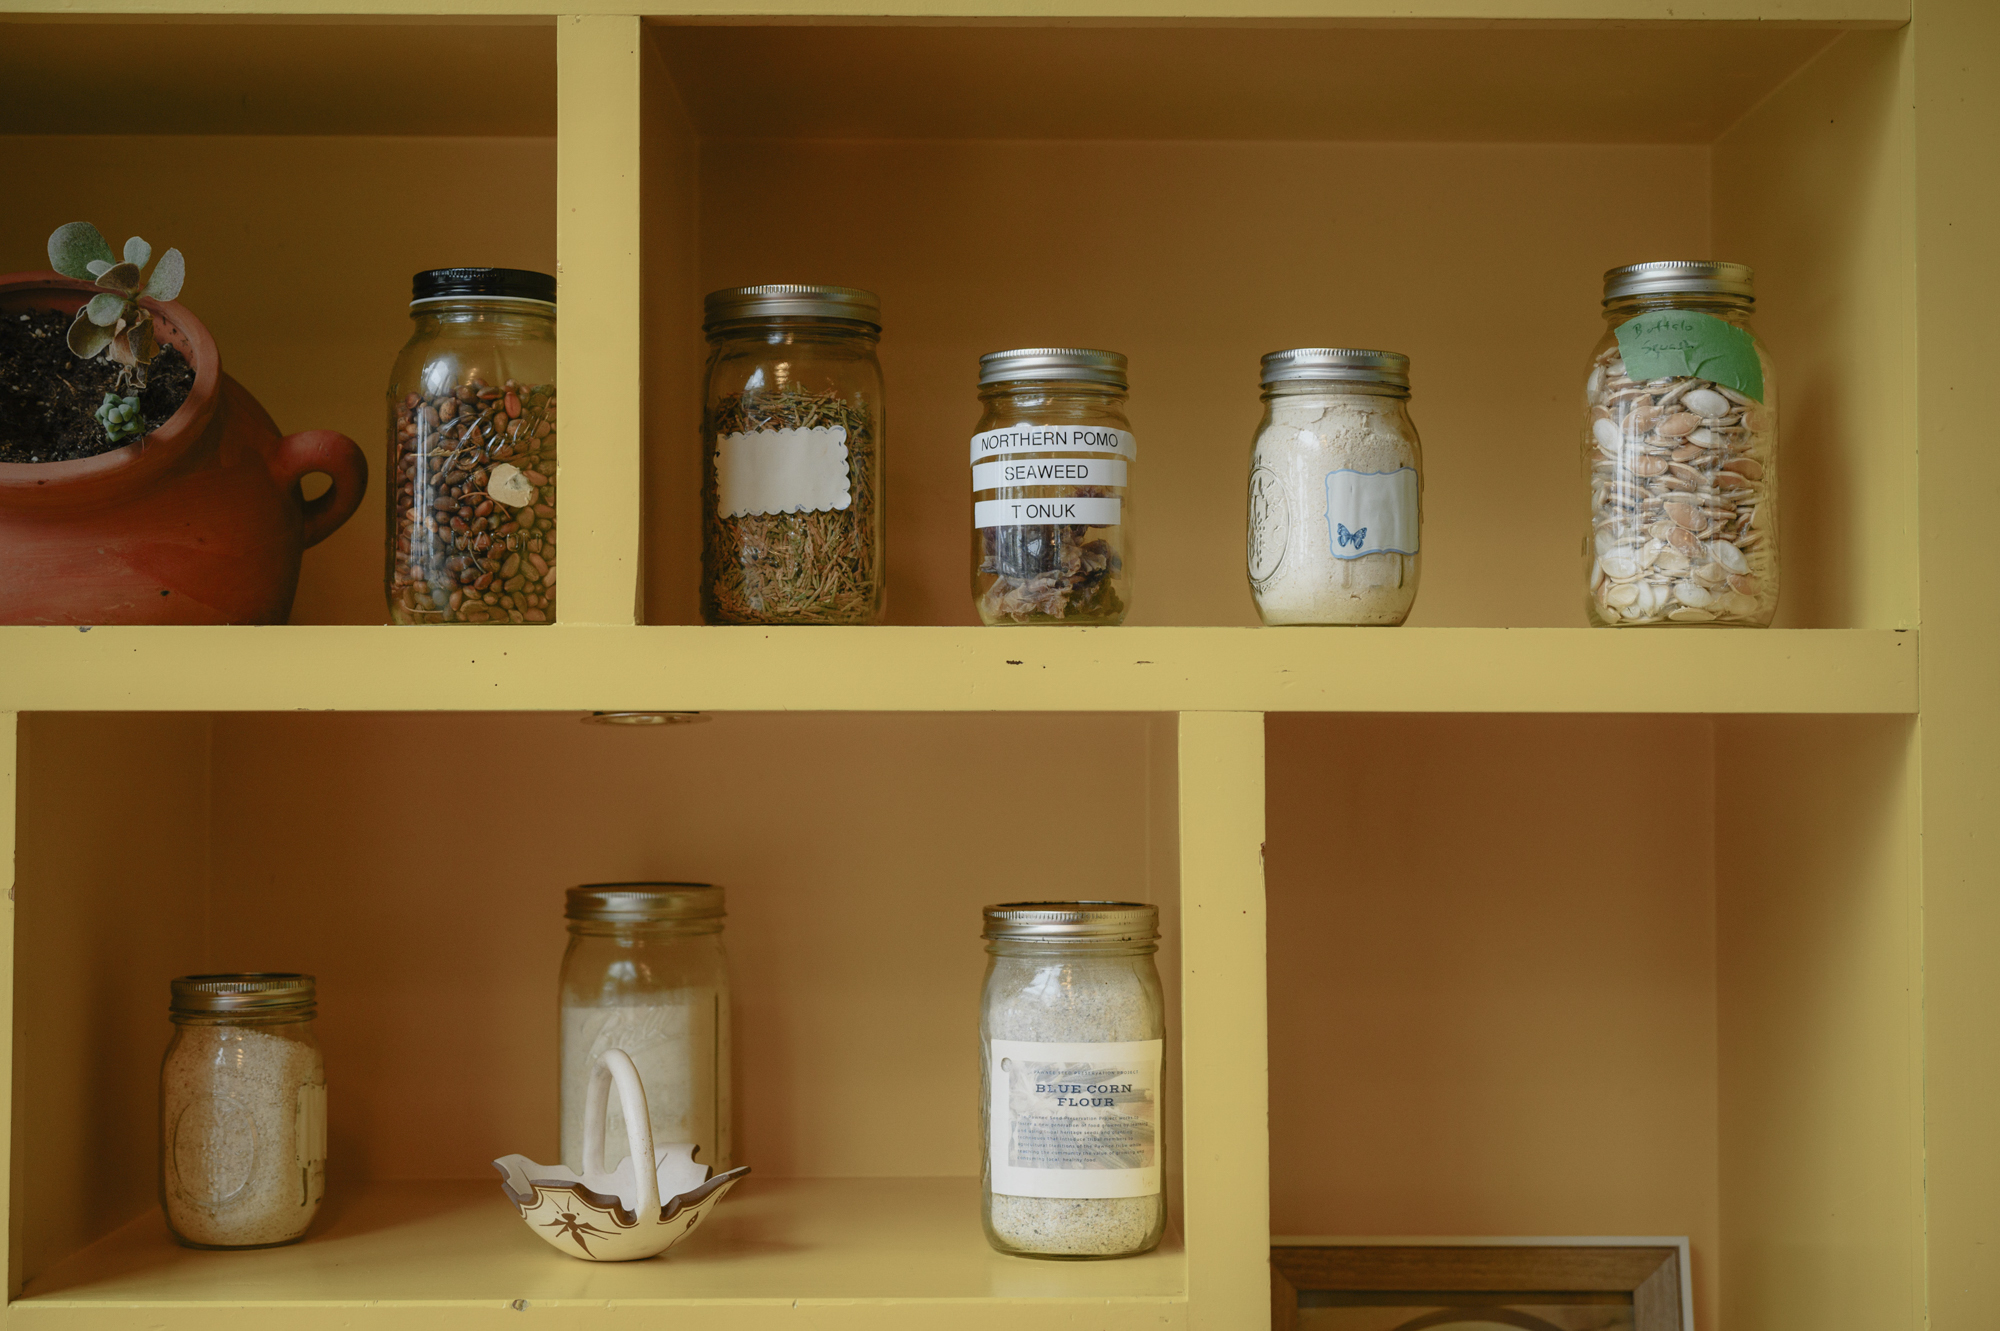 Mason jars filled with various substances -- seeds, powders, herbs -- are aligned on bright yellow shelves